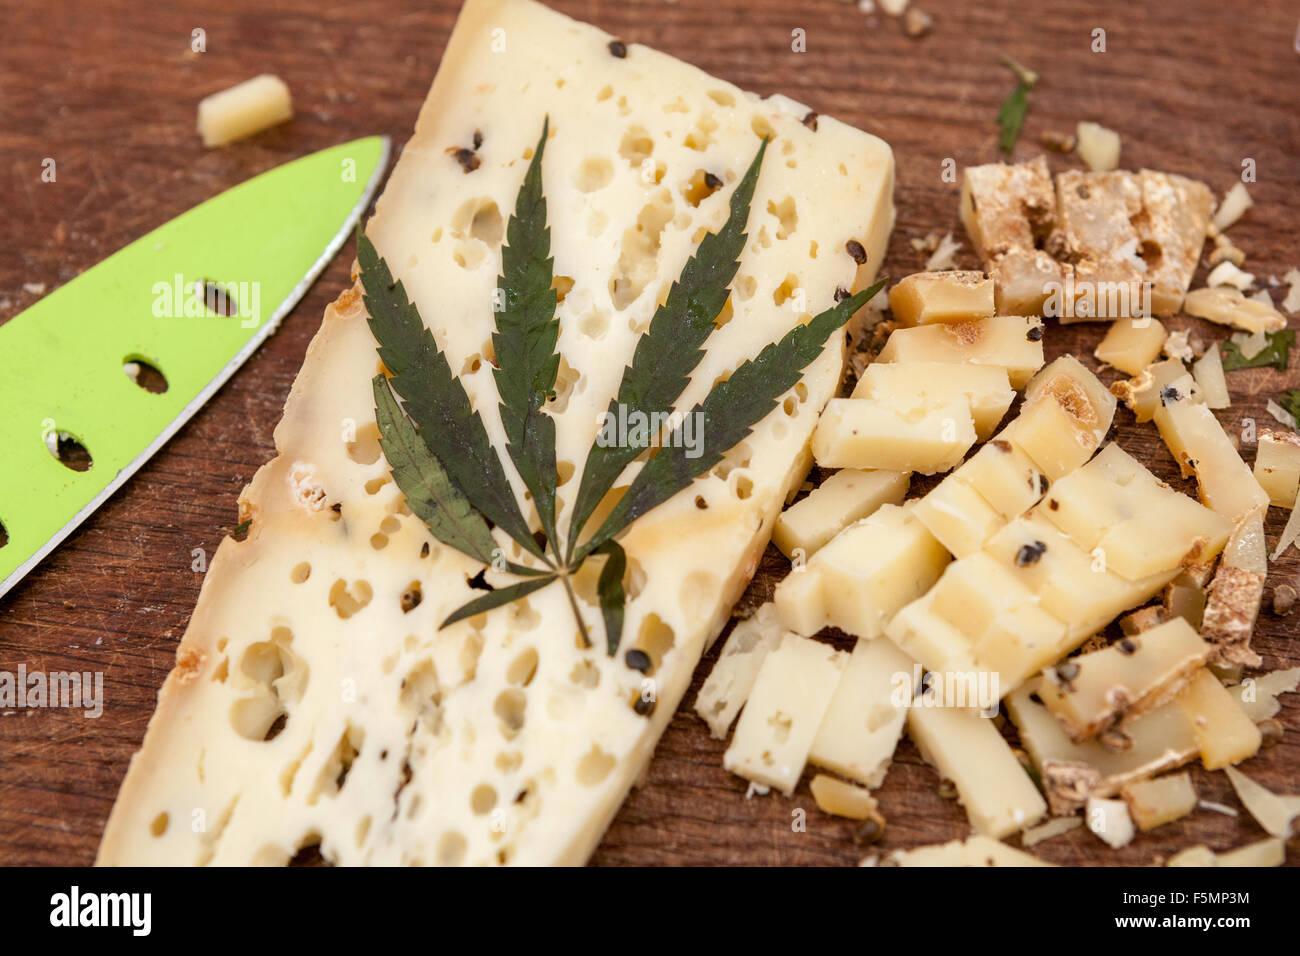 Sheep's cheese decorated with a cannabis leaf in the Prague Czech Republic Family farm product Stock Photo